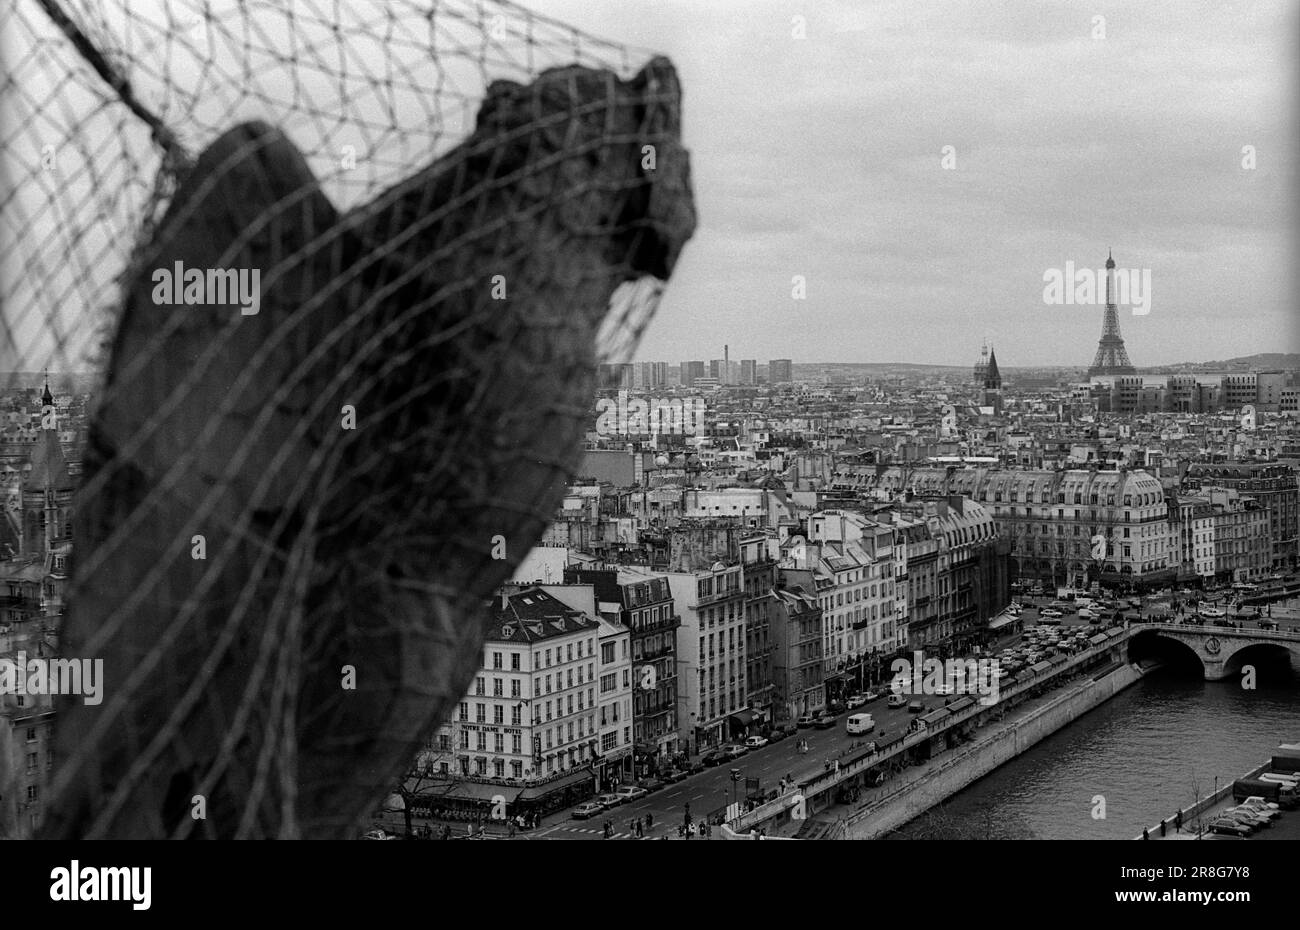 France, Paris, 24.03.1990, mythical creatures on the towers of Notre-Dame Stock Photo